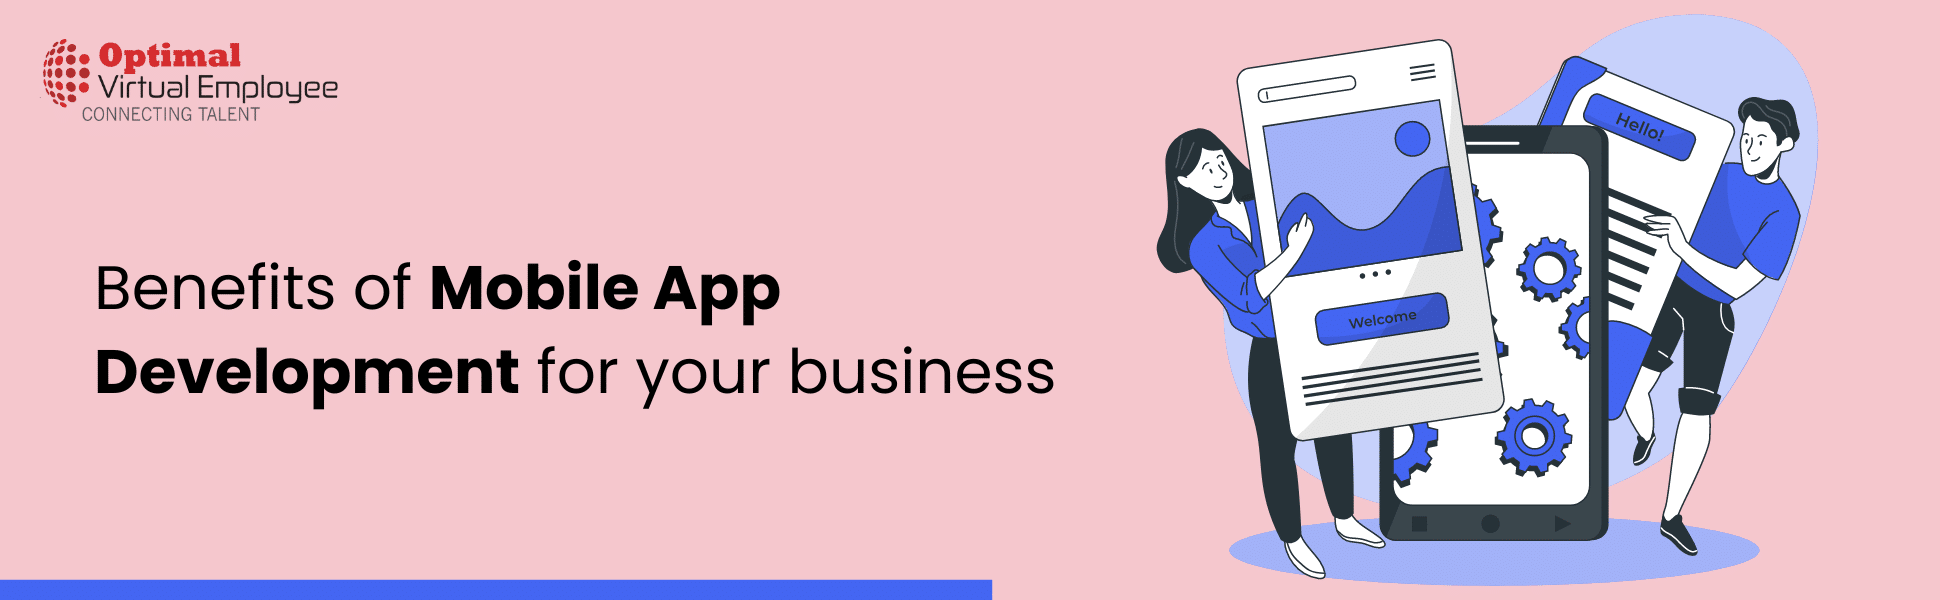 Benefits of Mobile App Development for your business